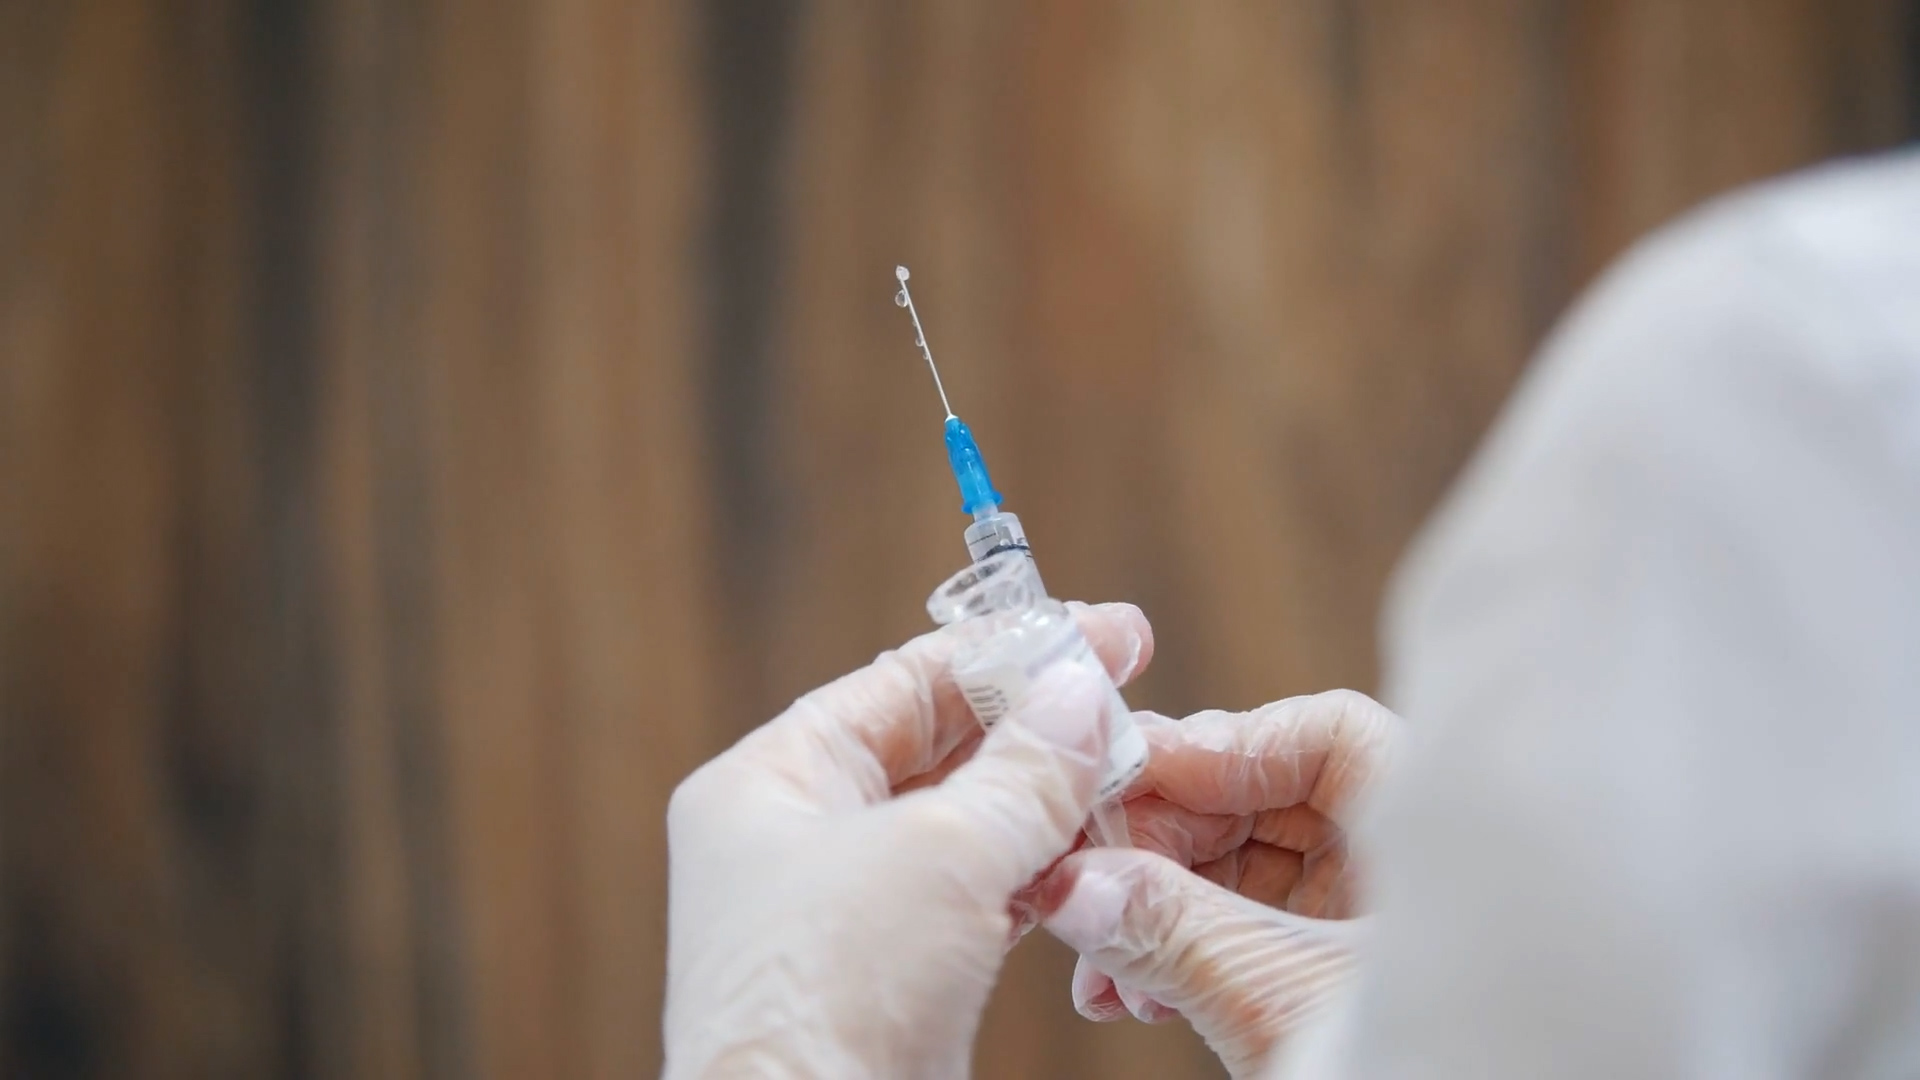 In Texas, anyone can get trained to administer Botox as long as it's under the supervision of a medical professional. (KXAN Photo: Chris Nelson)